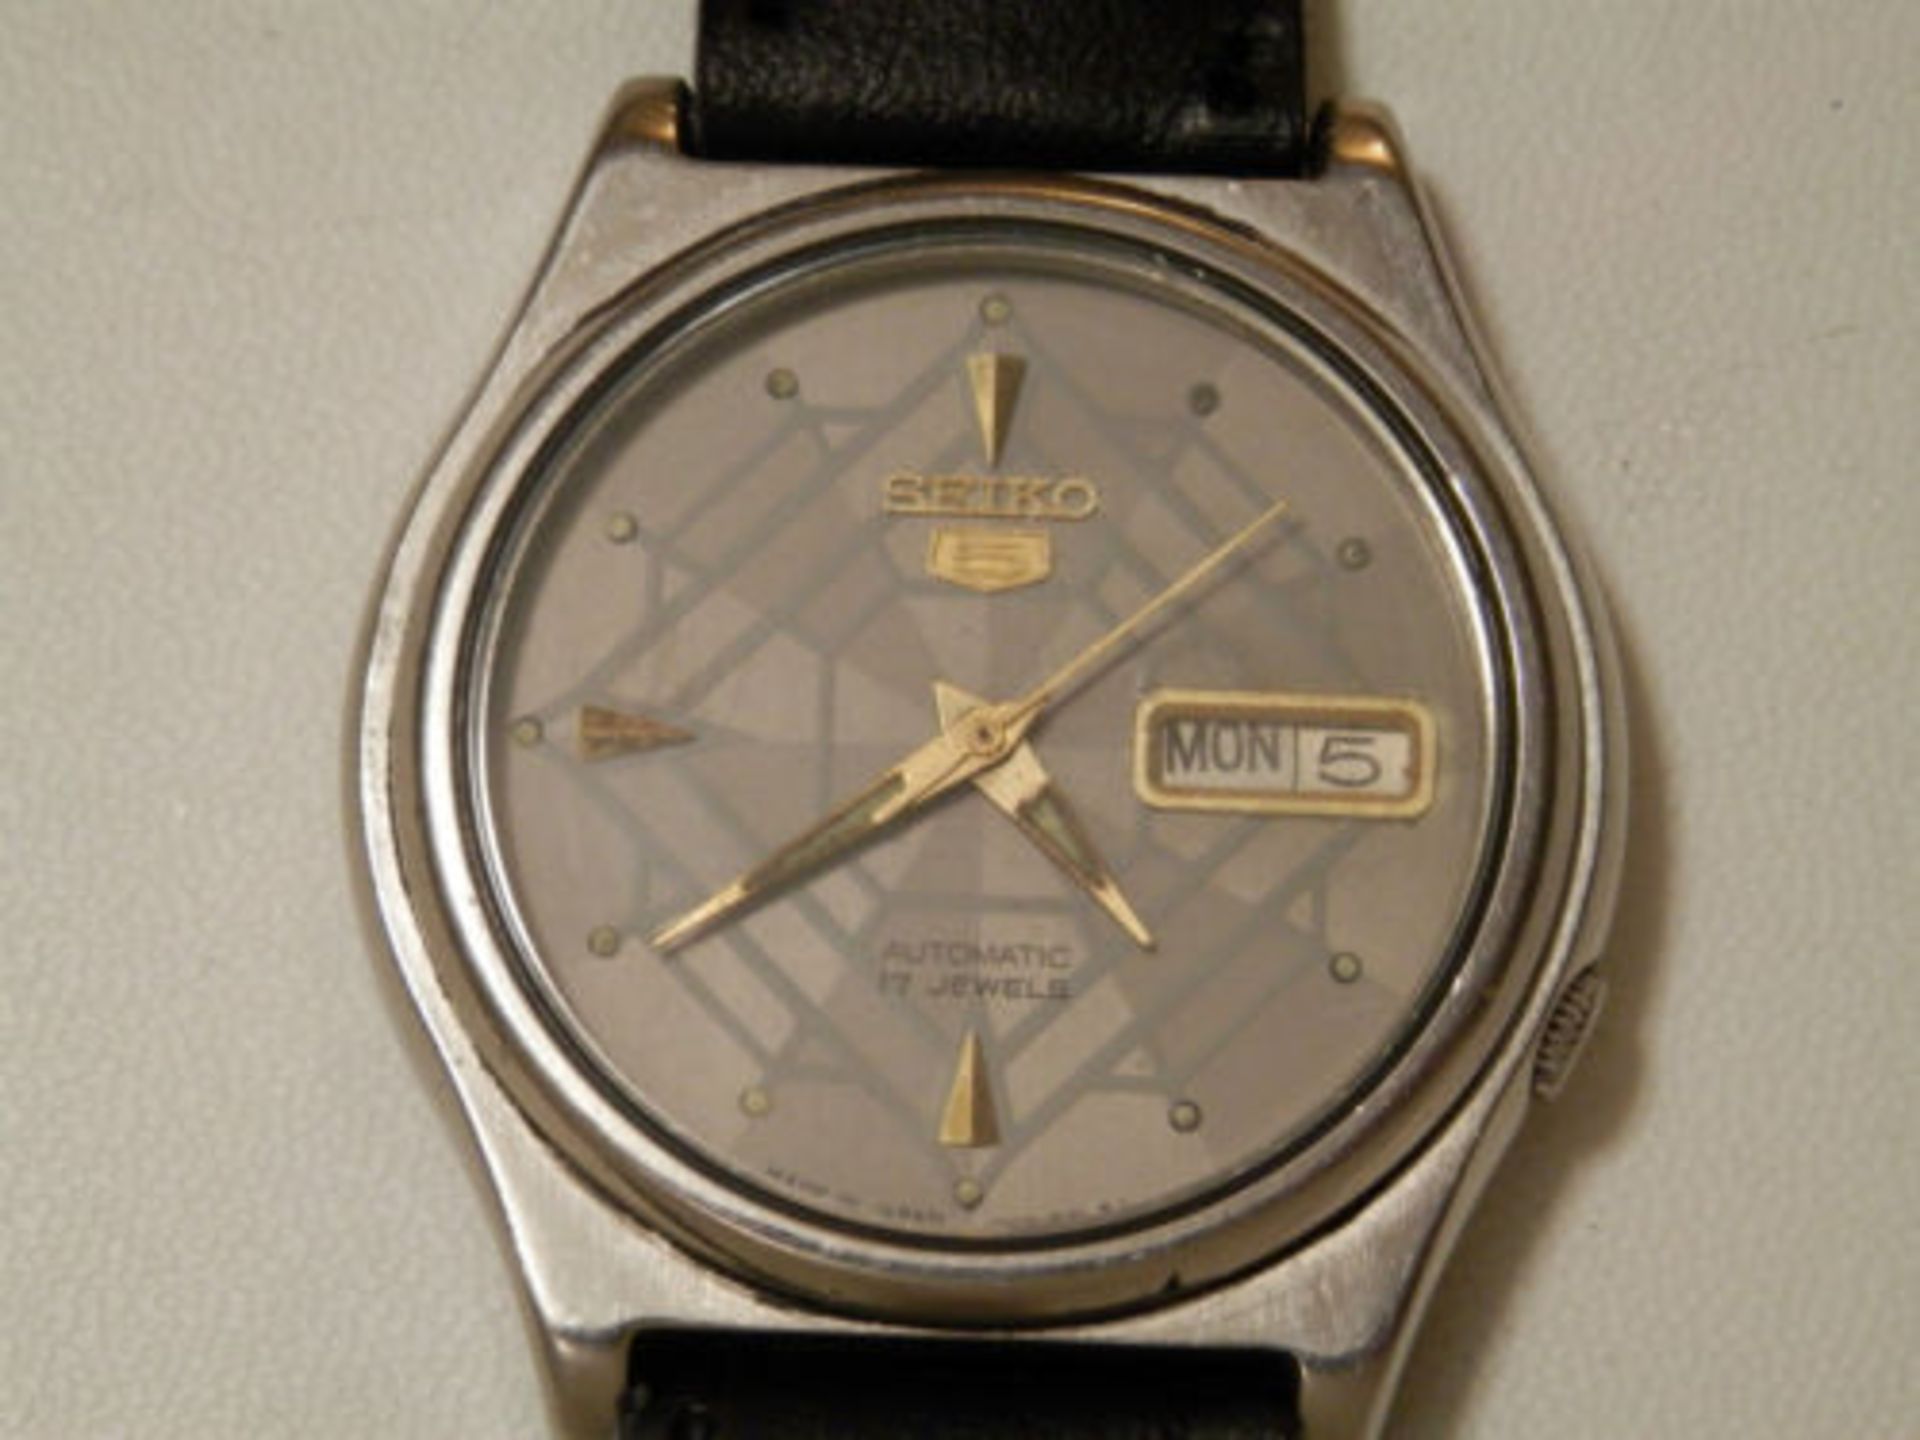 1984 WORKING SEIKO 7009 AUTOMATIC 17 JEWEL DAY/DATE WATCH, STAINLESS CASE. - Image 7 of 13